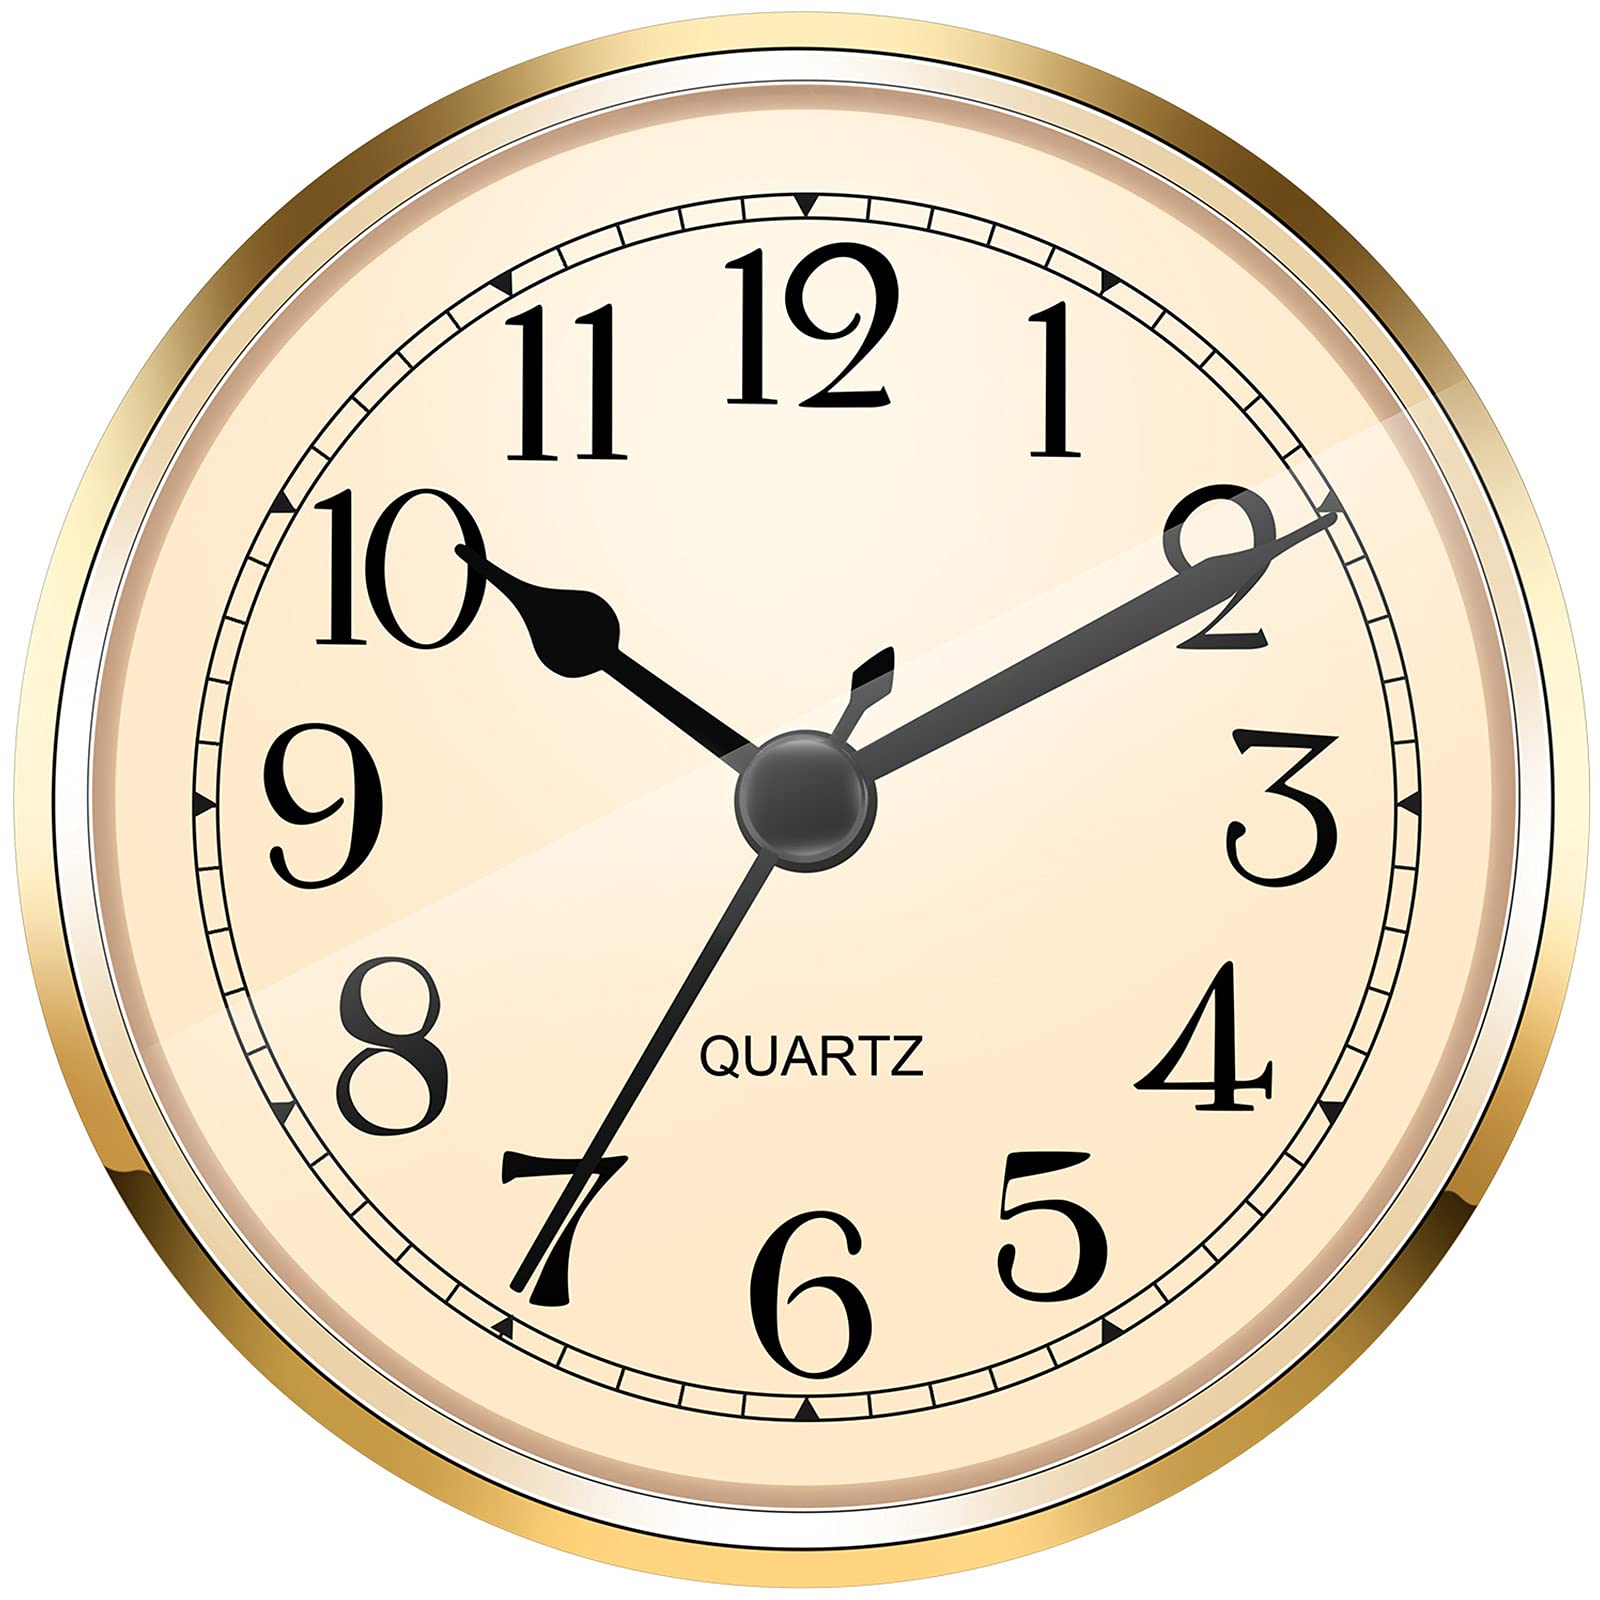 Hicarer 3-1/2 Inch (90 mm) Quartz Clock Fit-up/Insert with Arabic Numeral (Gold)